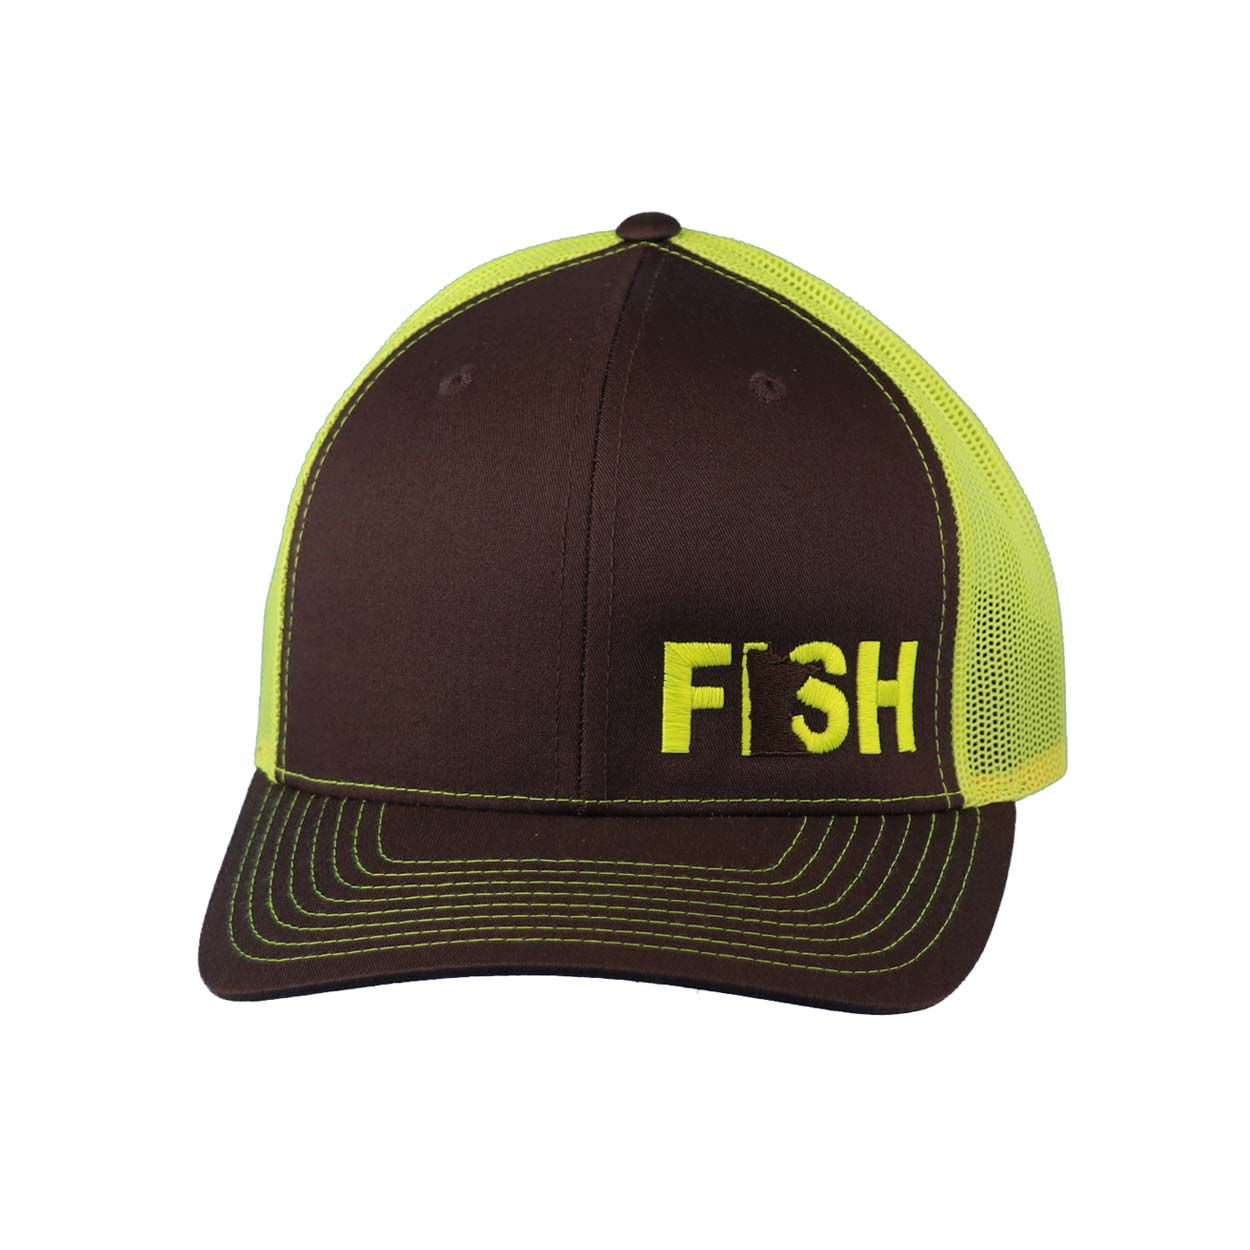 Fish Minnesota Night Out Embroidered Snapback Trucker Hat Gray/Neon